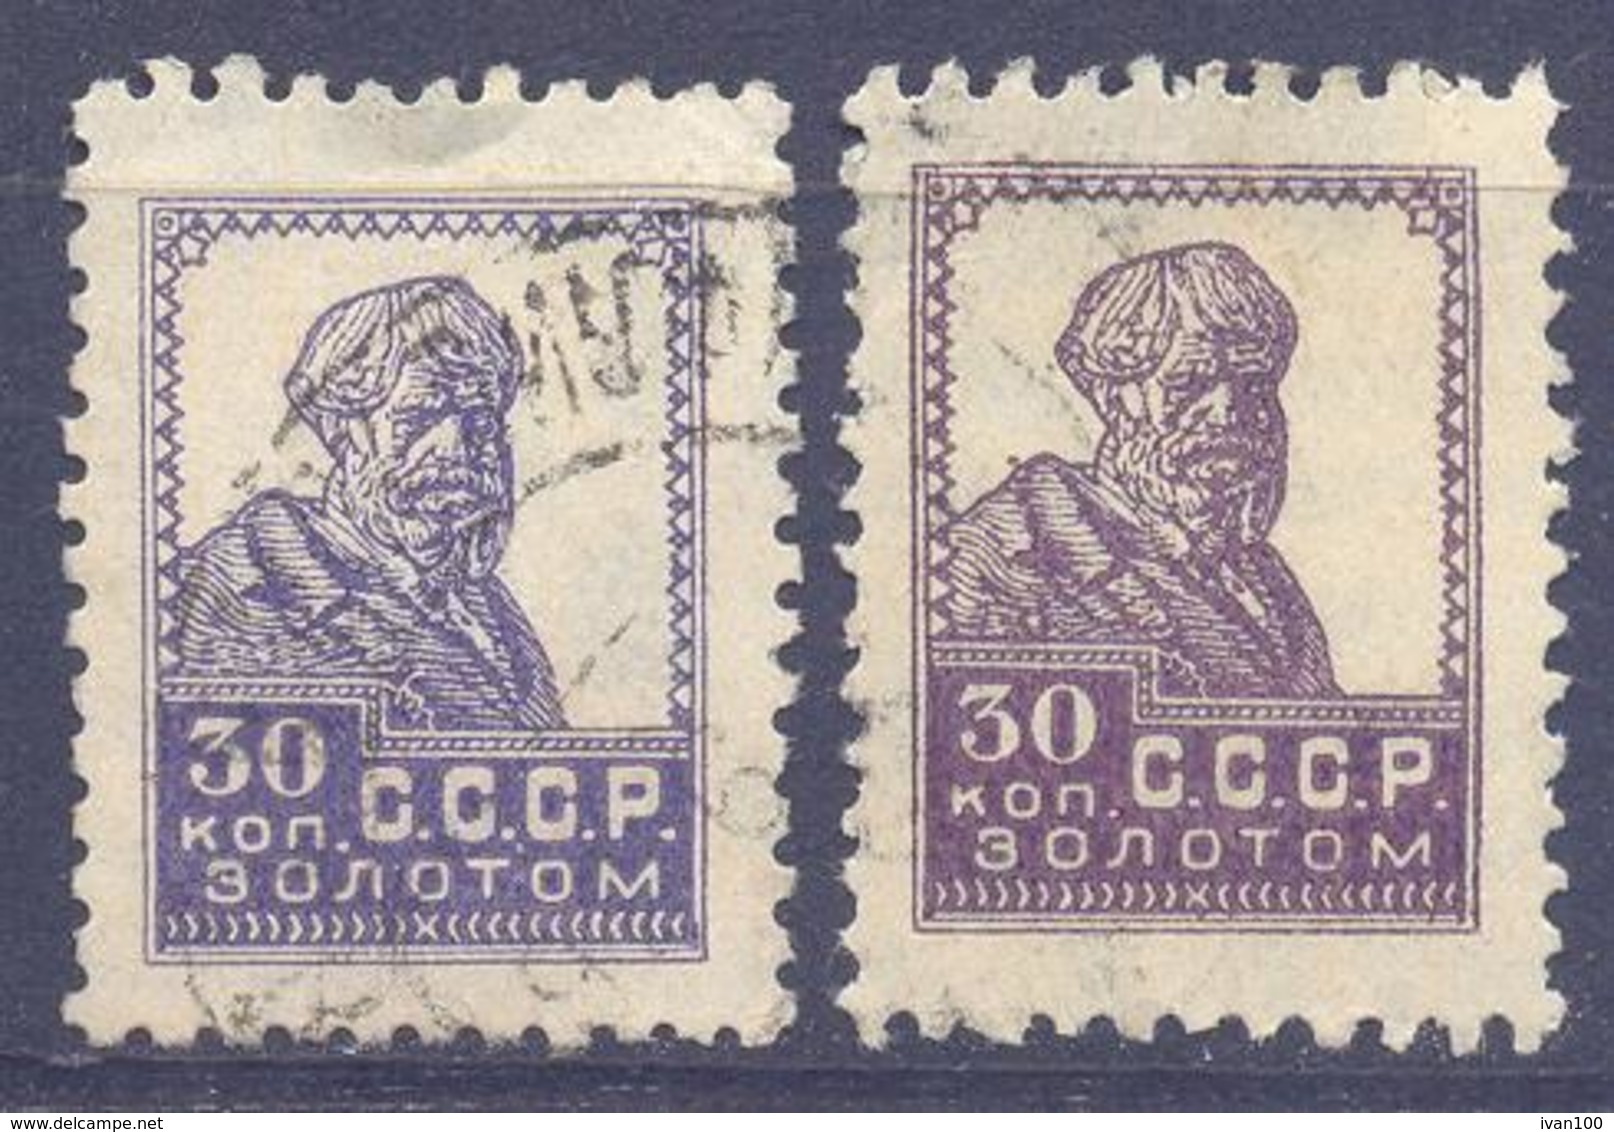 1925. USSR/Russia,  Definitives, 30k, Mich.285 IAX, TYPO, Watermarks, 2v With Different Shide Of Colour,  Used - Usati